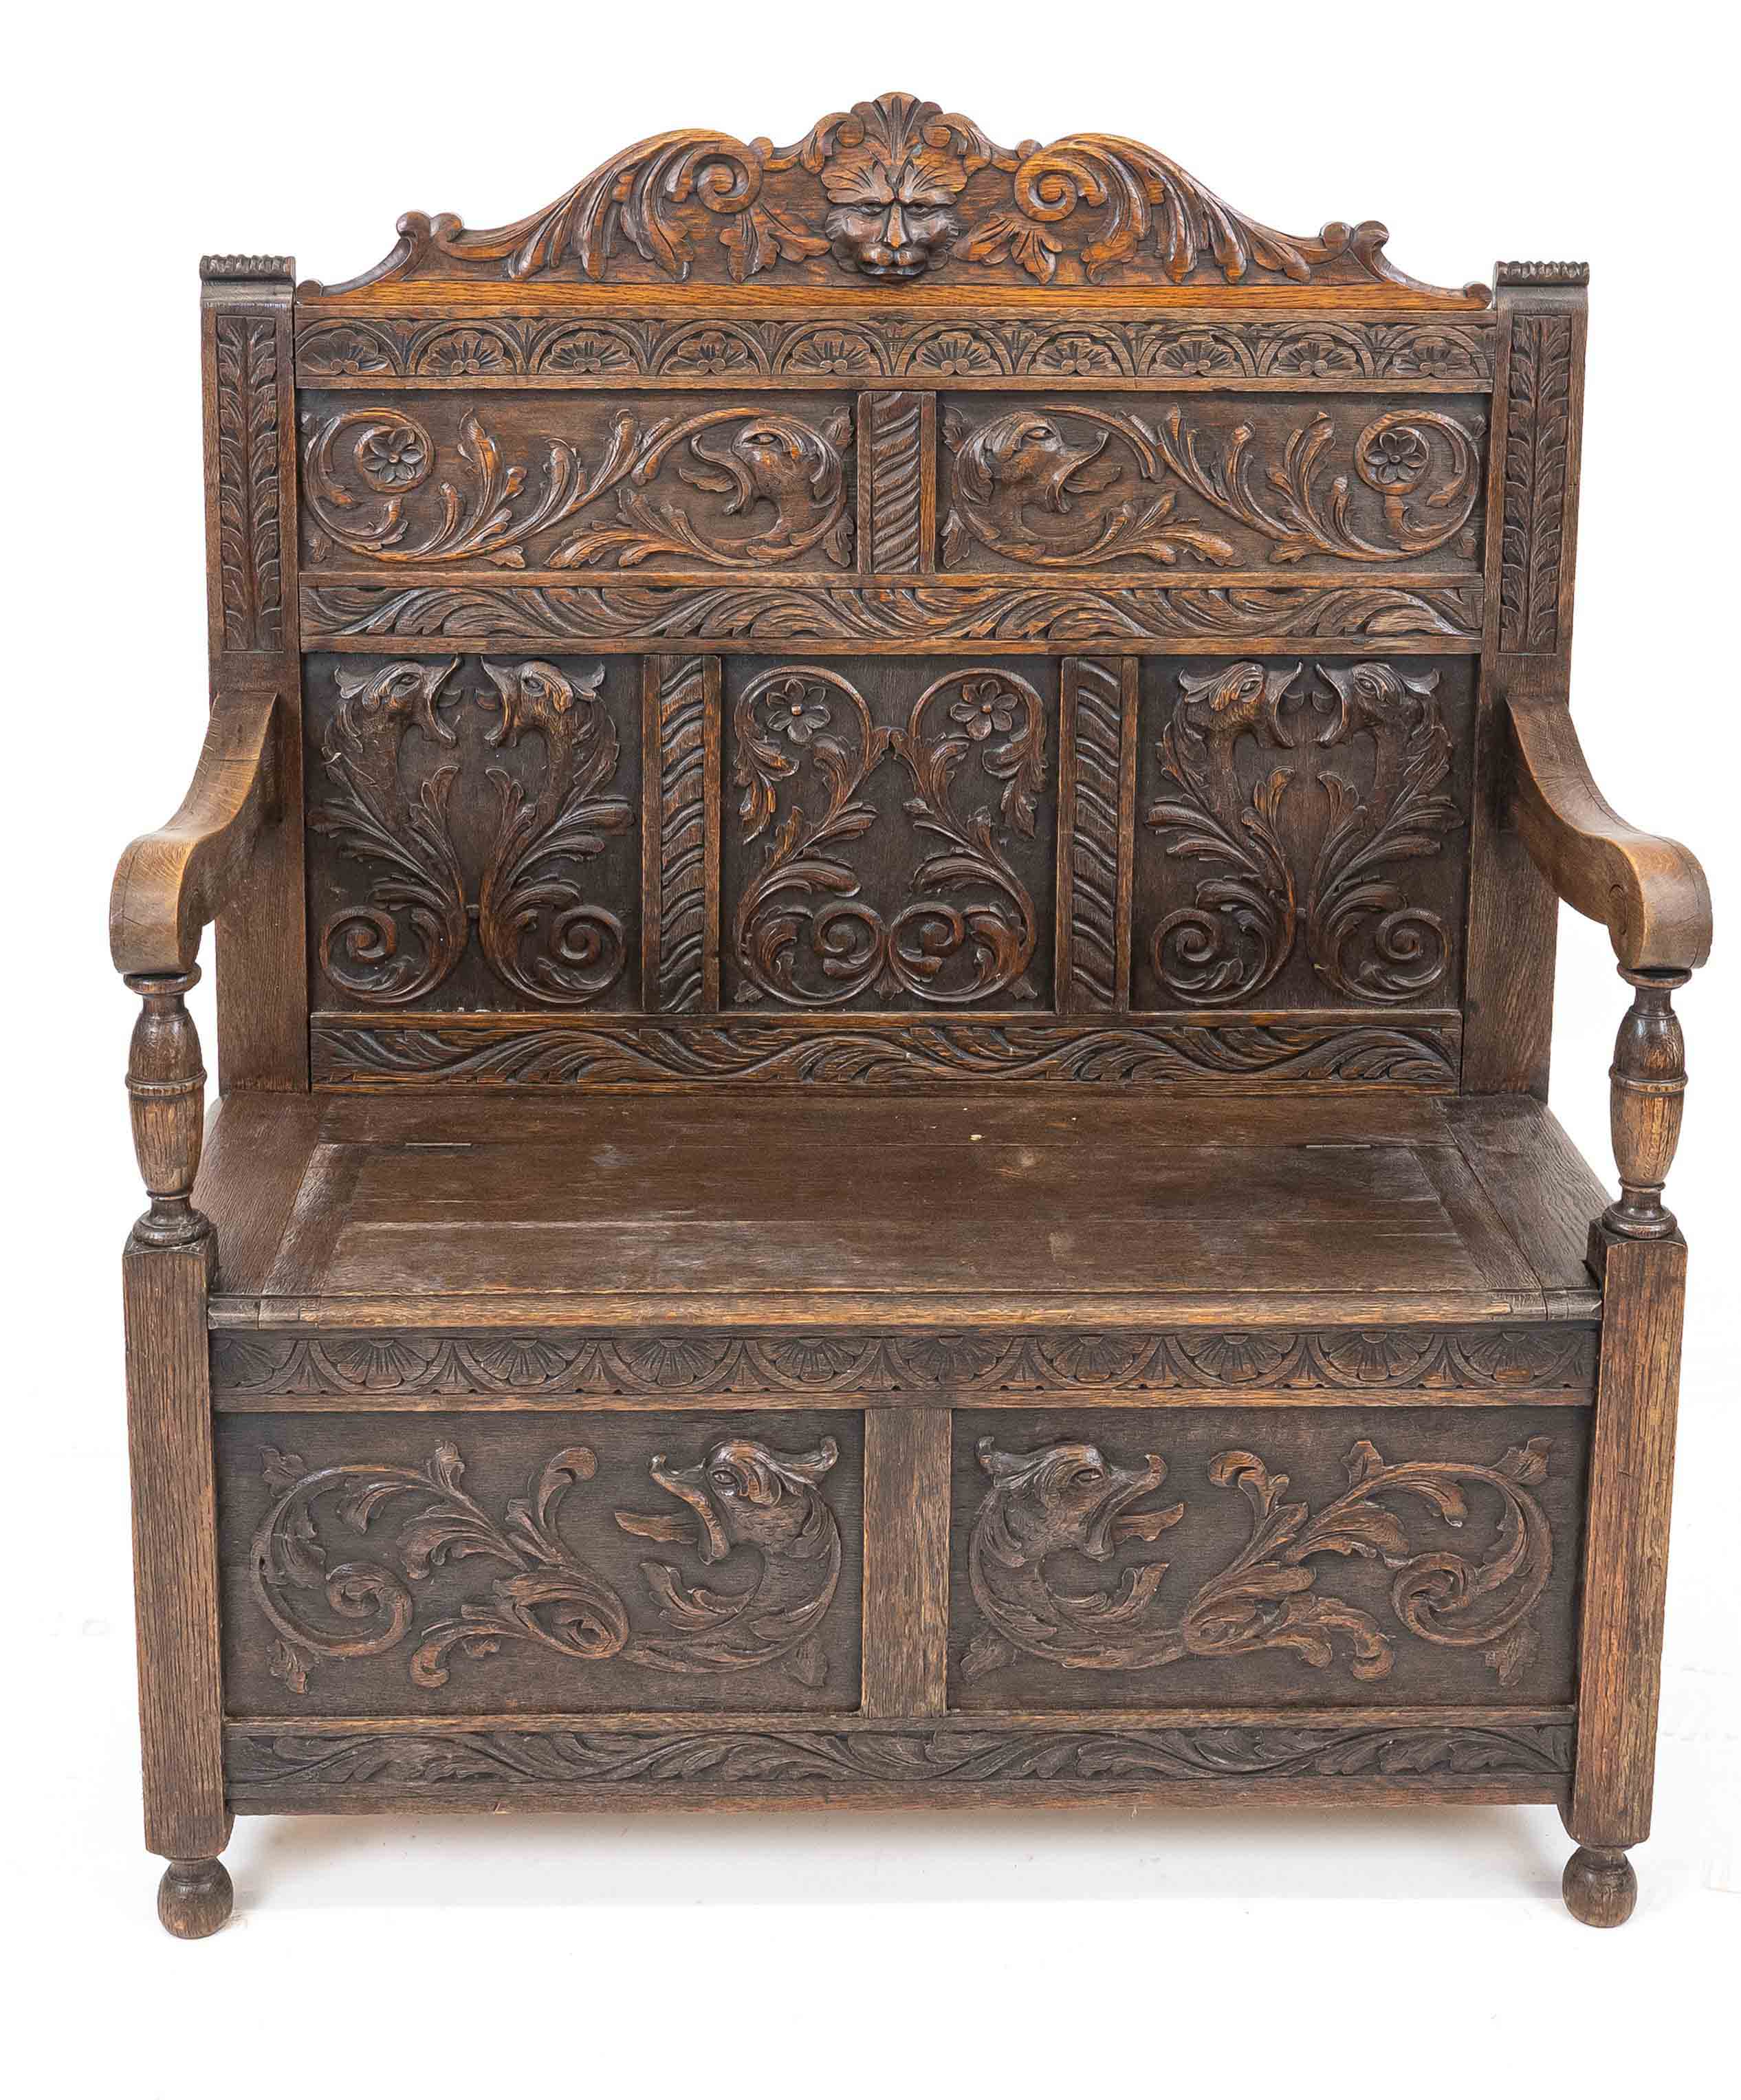 Chest bench around 1880, oak, typical carving of the time, 138 x 106 x 43 cm.